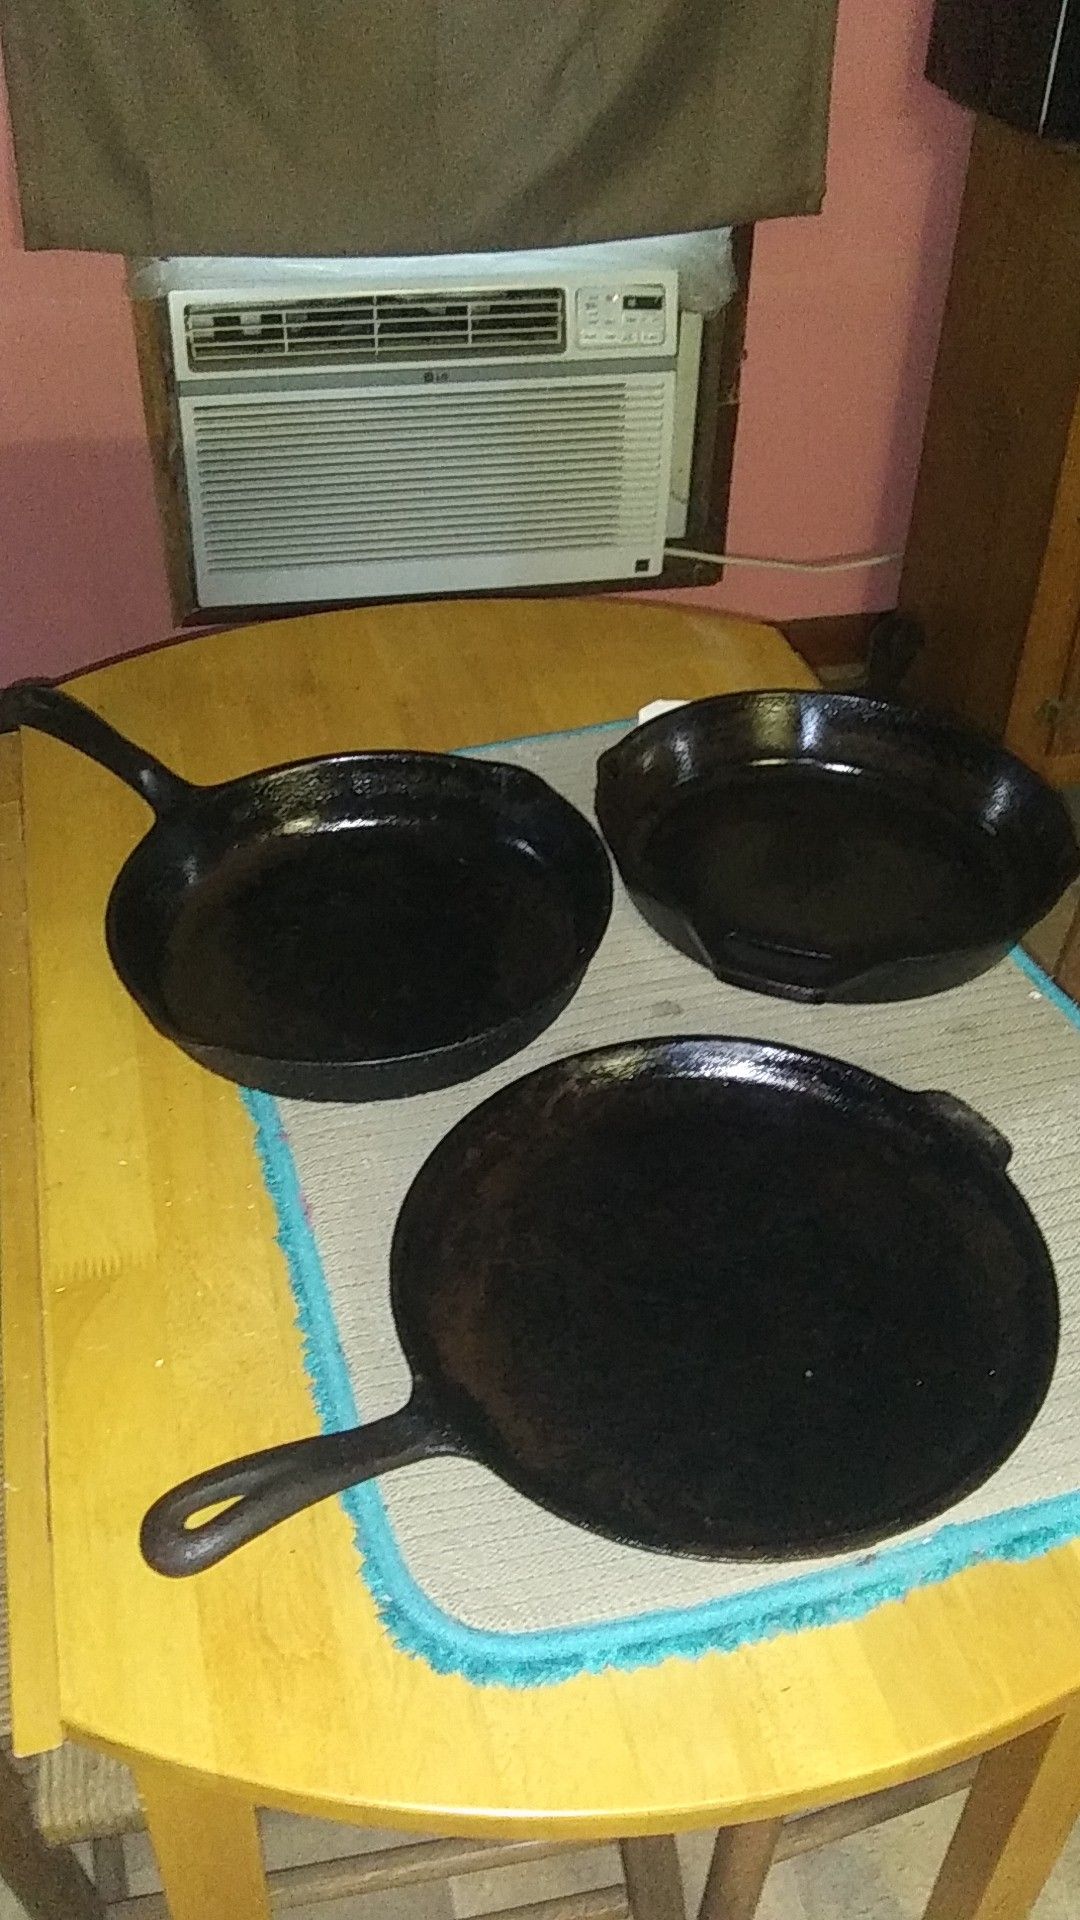 1/10 inch&1 /12inch Wagner"s orignal cast iron skillets,dated in1891 also 1/10inch Lodge iron skillet